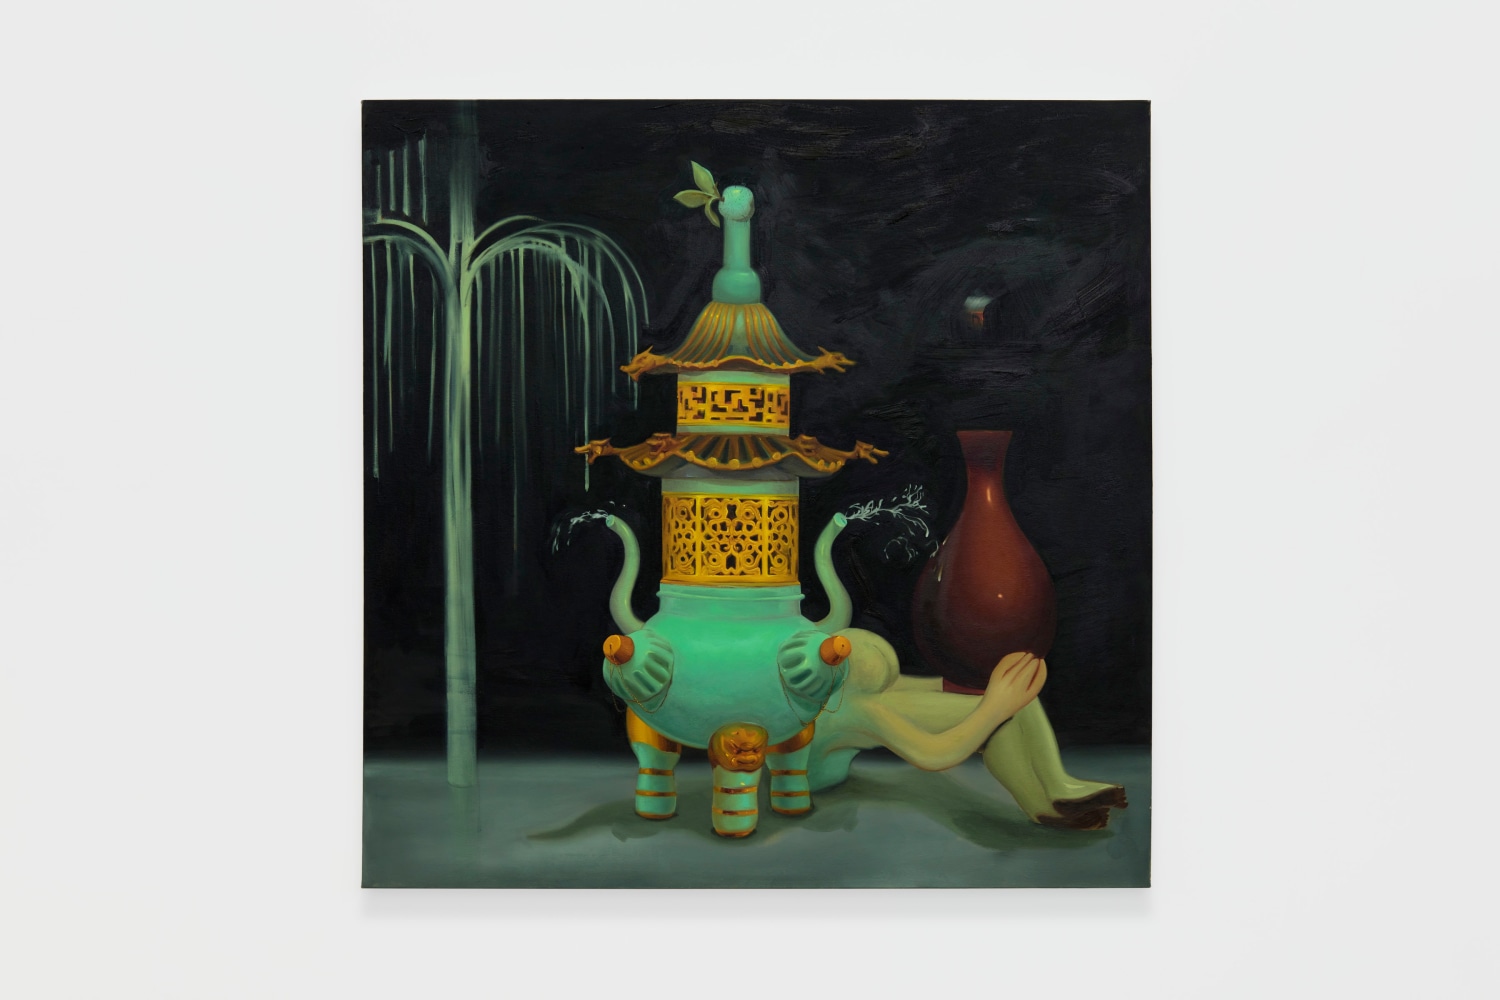 Dominique Fung
What&amp;#39;s Left Behind, 2020
oil on canvas
60&amp;nbsp;x 60&amp;nbsp;in
152.4&amp;nbsp;x 152.4&amp;nbsp;cm